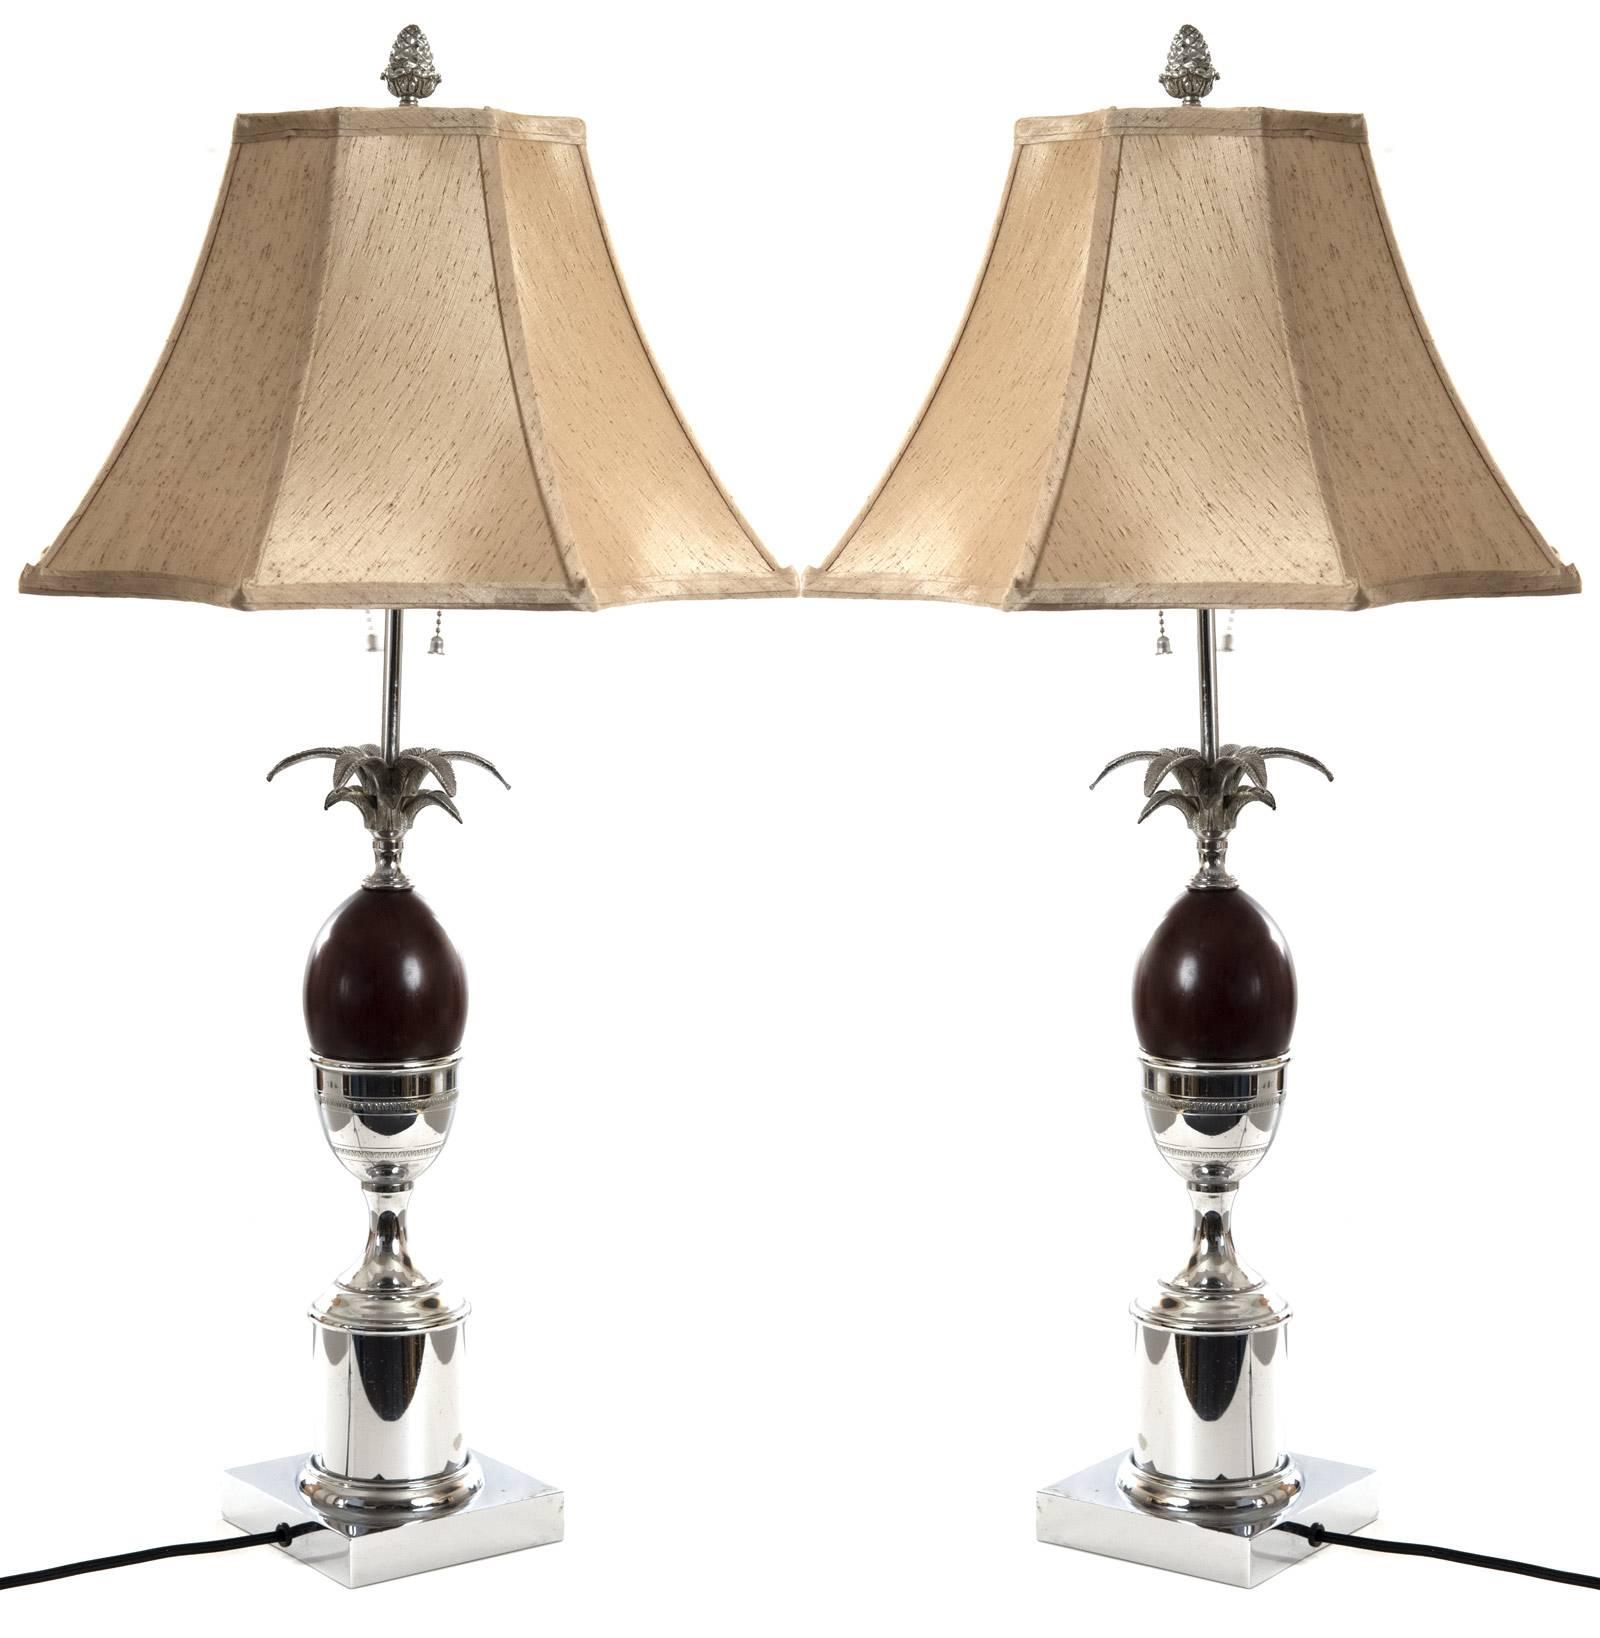 A pair of 20th century Hollywood Regency style table lamps on a square base with a stepped column on which sits an urn holding a wooden ovoid form that is mounted with pineapple leaves, with a chrome neck that supports two-lights. The lamp is fitted